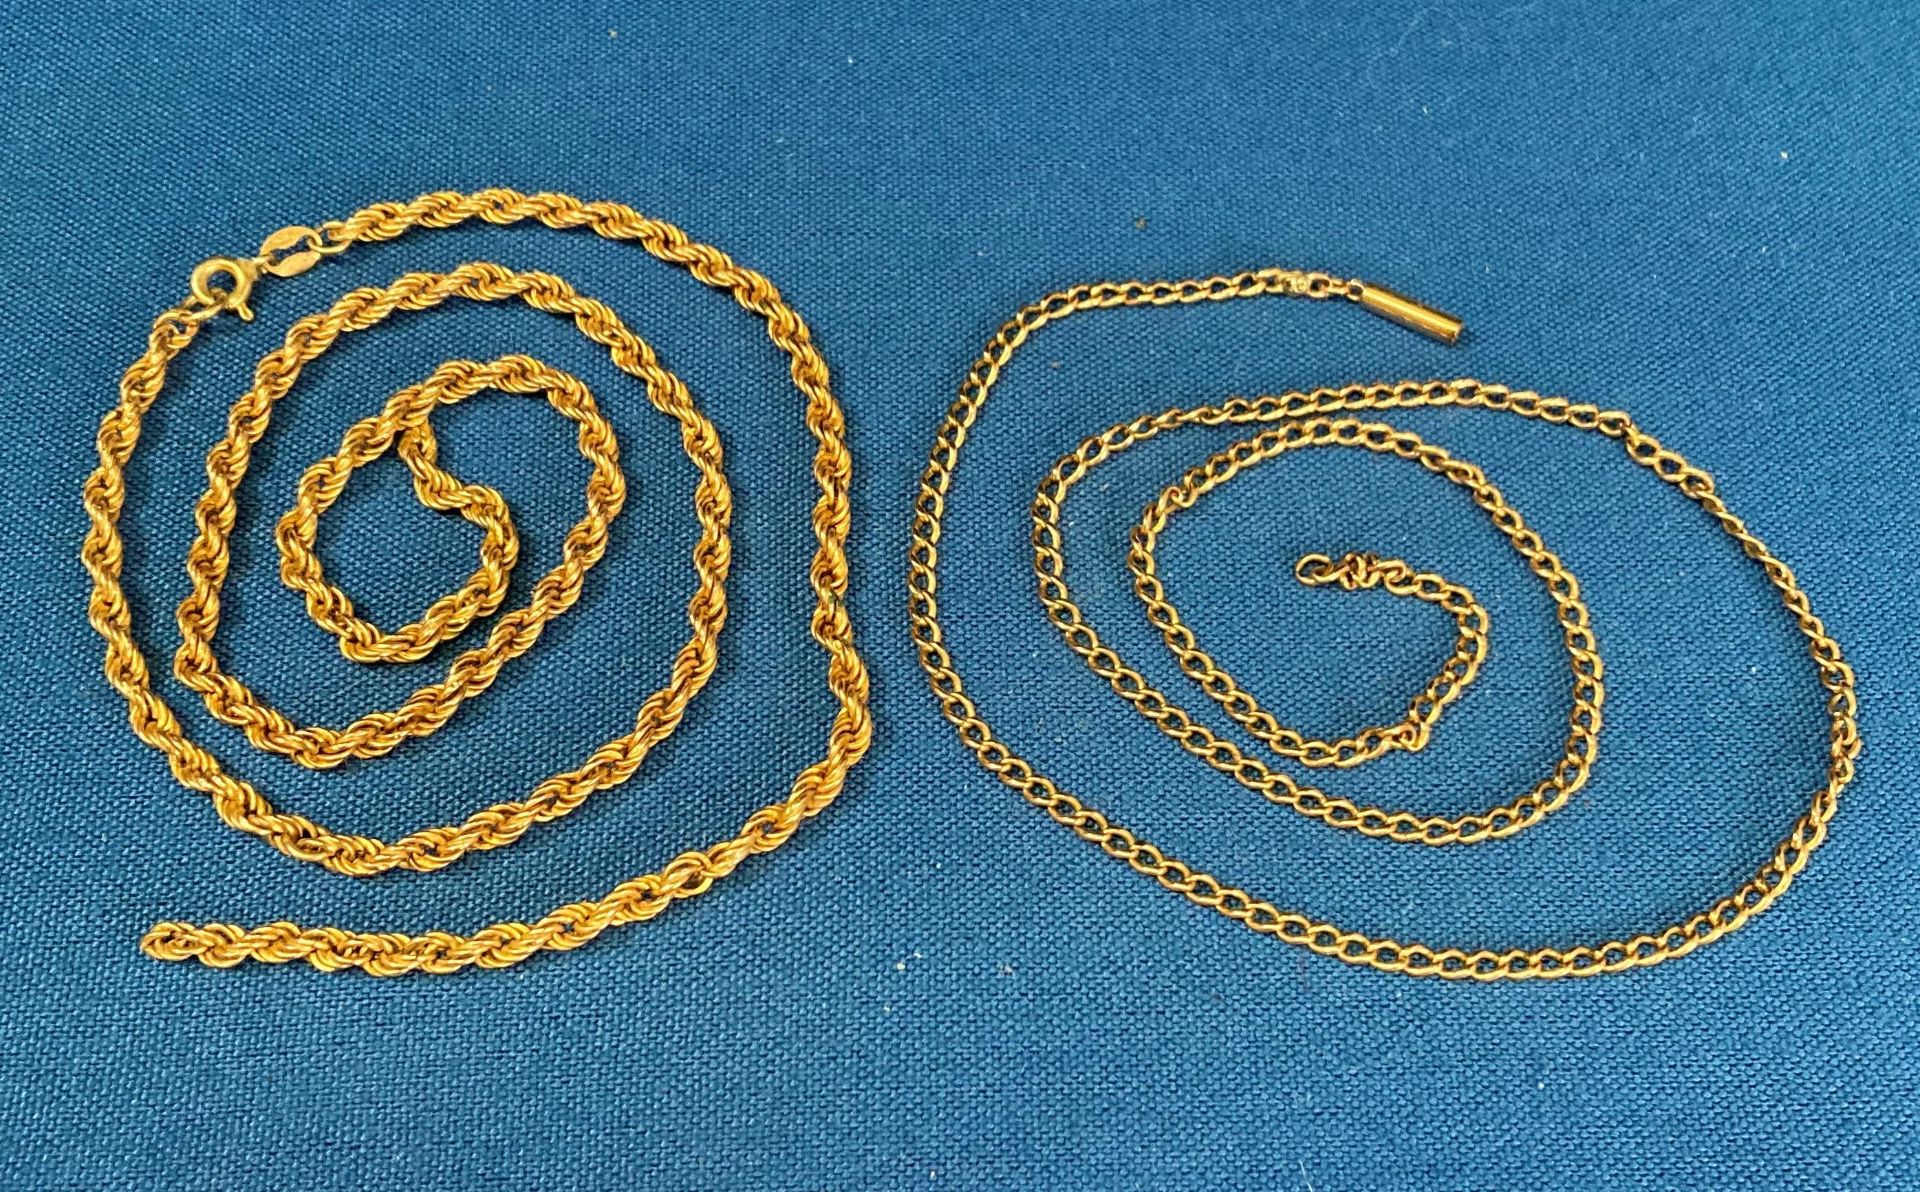 Two 9ct gold (375) chain, 17" and 18" long - both broken.